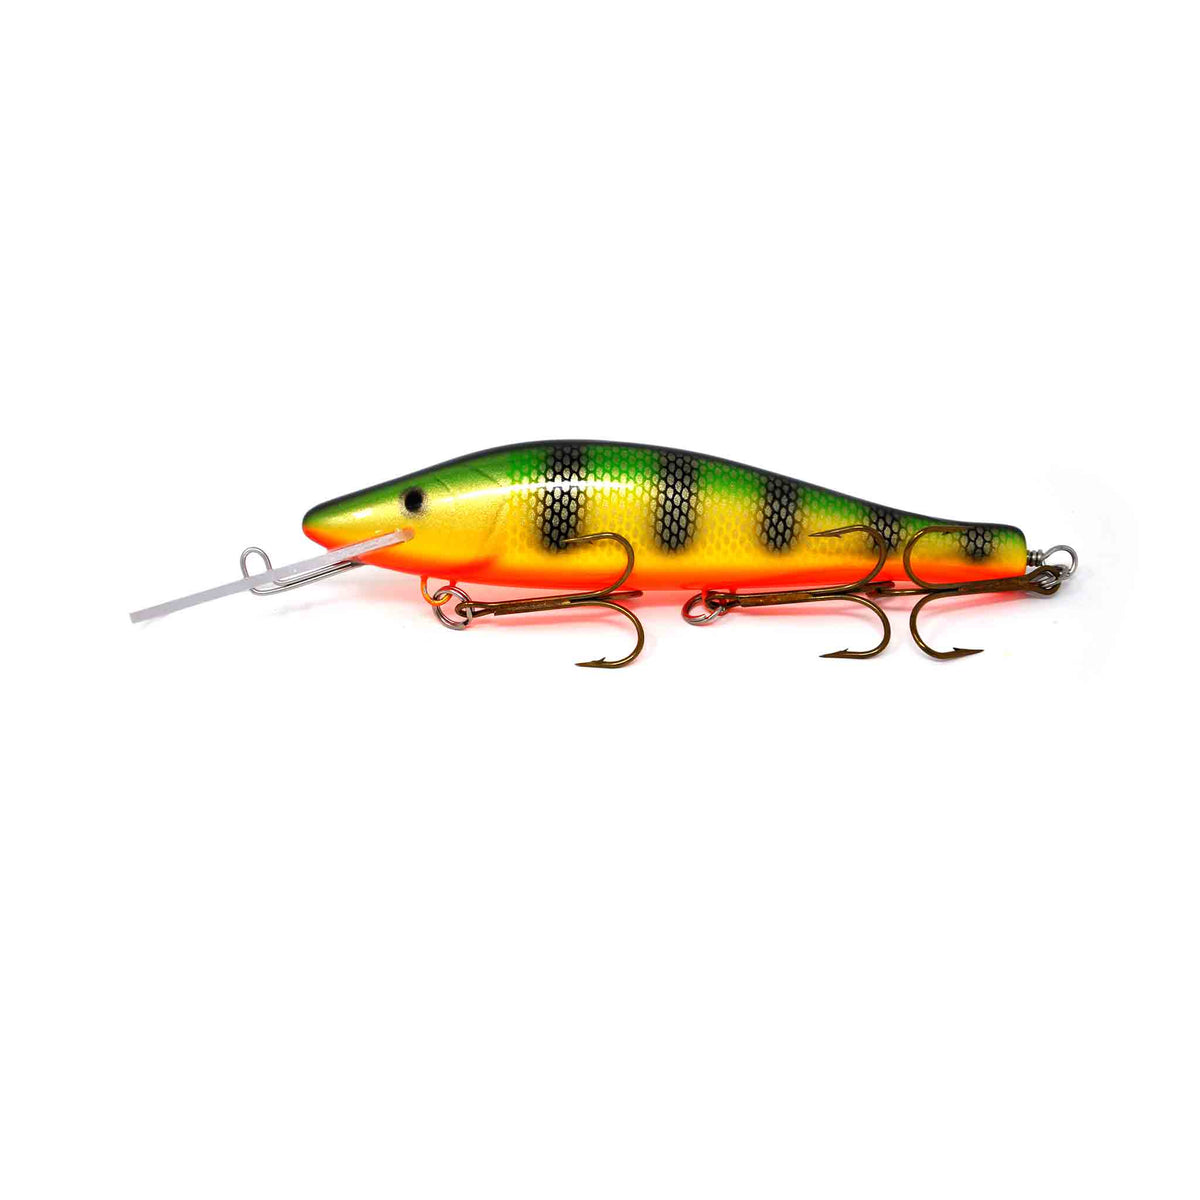 View of Crankbaits Legend lures Perch Bait Crankbait Perch / Orange Belly available at EZOKO Pike and Musky Shop